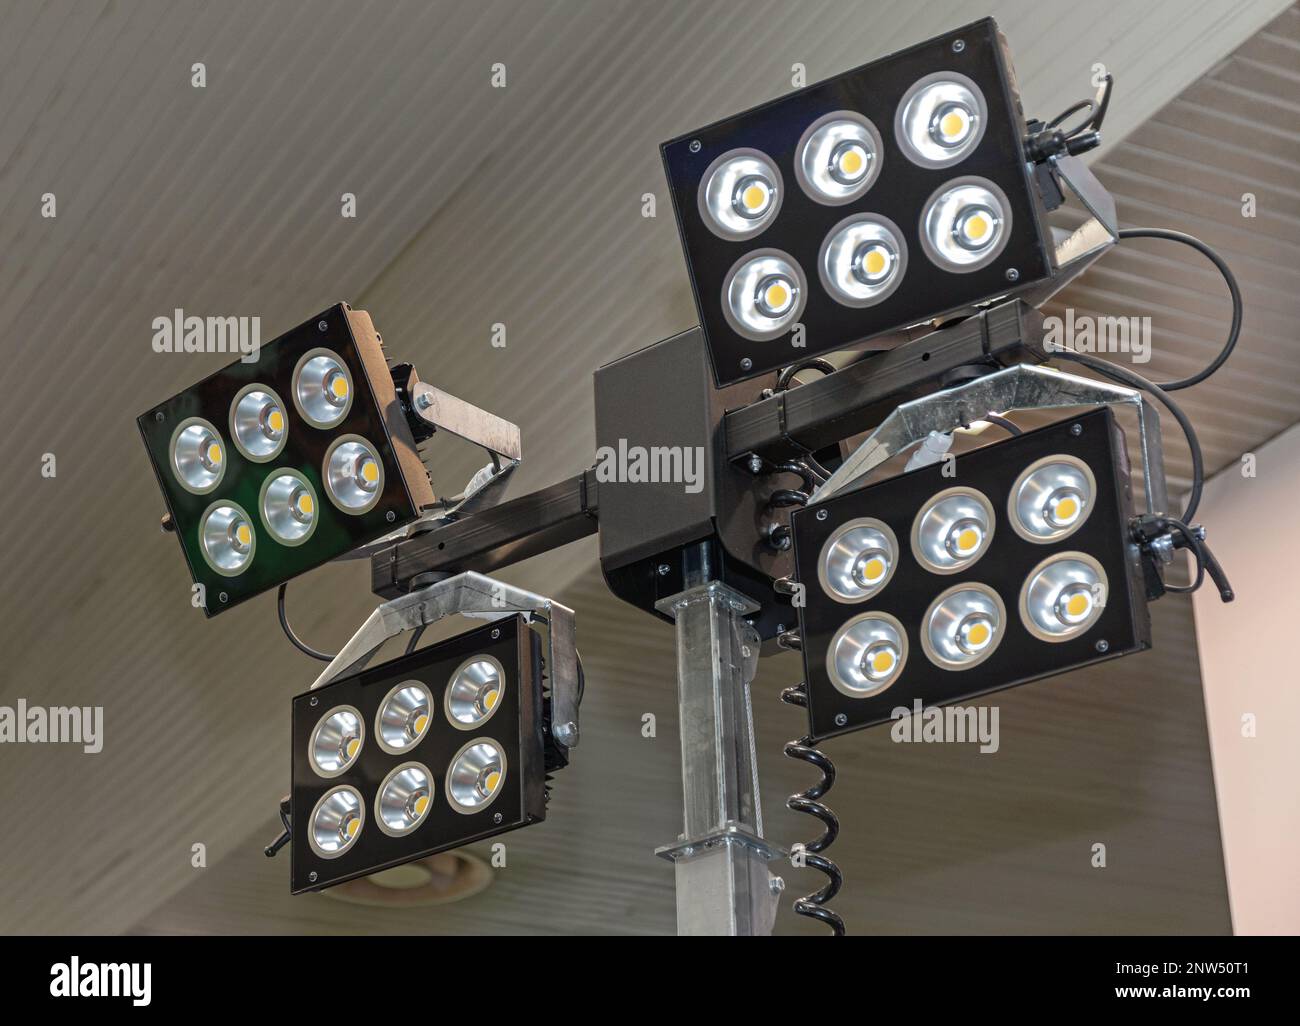 Portable Mobile Led Lighting Reflectors Pole Tower at Construction Site Stock Photo